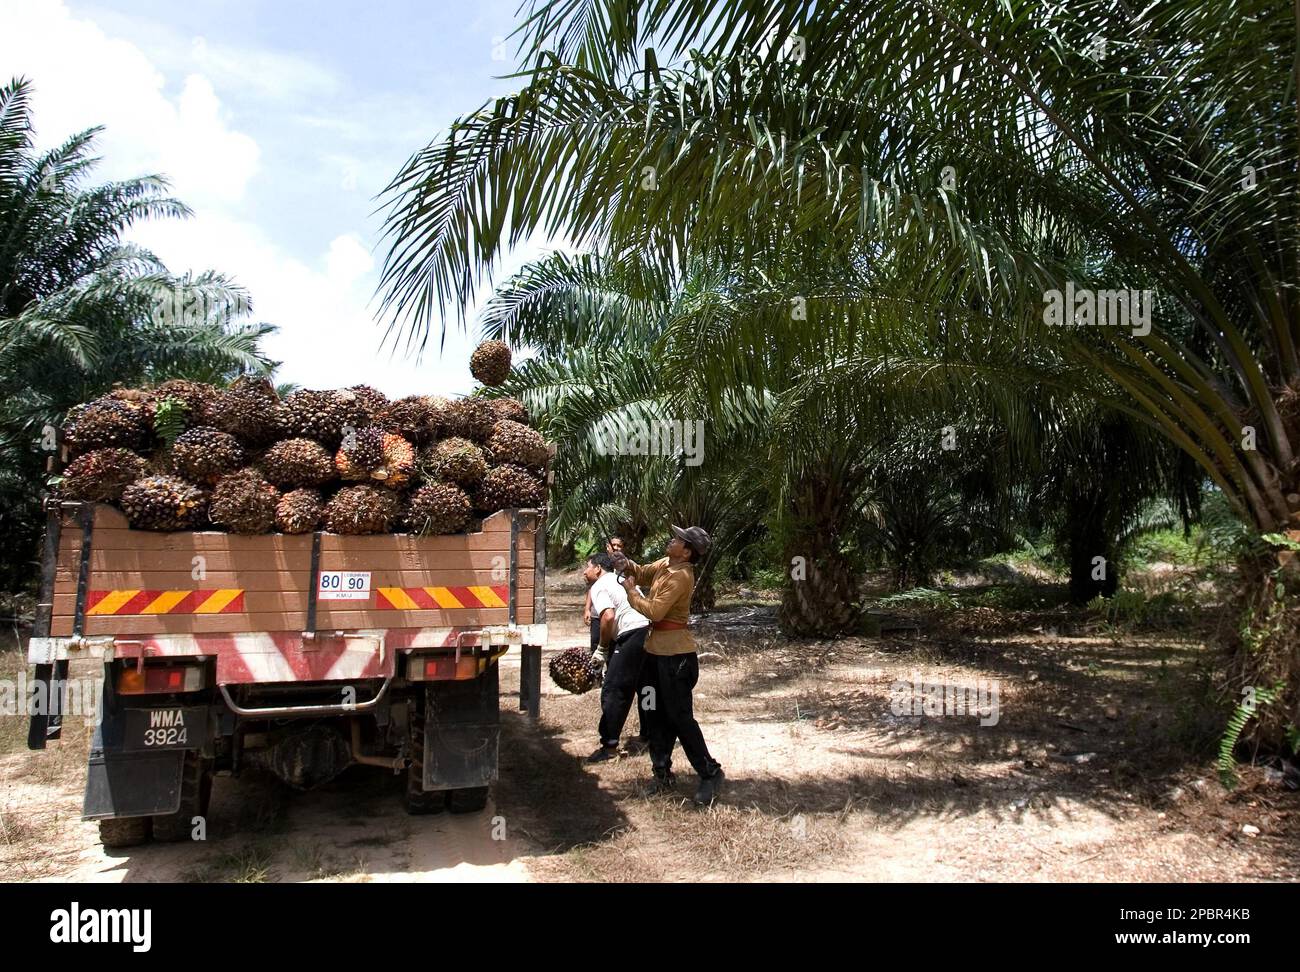 ** FILE ** A worker loads palm oil fruits onto a lorry at a palm oil plantation in Sepang, Malaysia, in this March 13, 2007 file photo. Palm oil, once seen as a cheap and environmentally friendly alternative to petroleum for power plants, is being looked at again. Environmentalists have long warned that many plantations in Indonesia and Malaysia were planted on clear-cut rain forests, threatening the home of endangered animals like the orangutan and the Sumatran tiger. Now, some electricity companies have put plans on hold to switch to palm oil fuel. A report late last year claims the environm Foto de stock